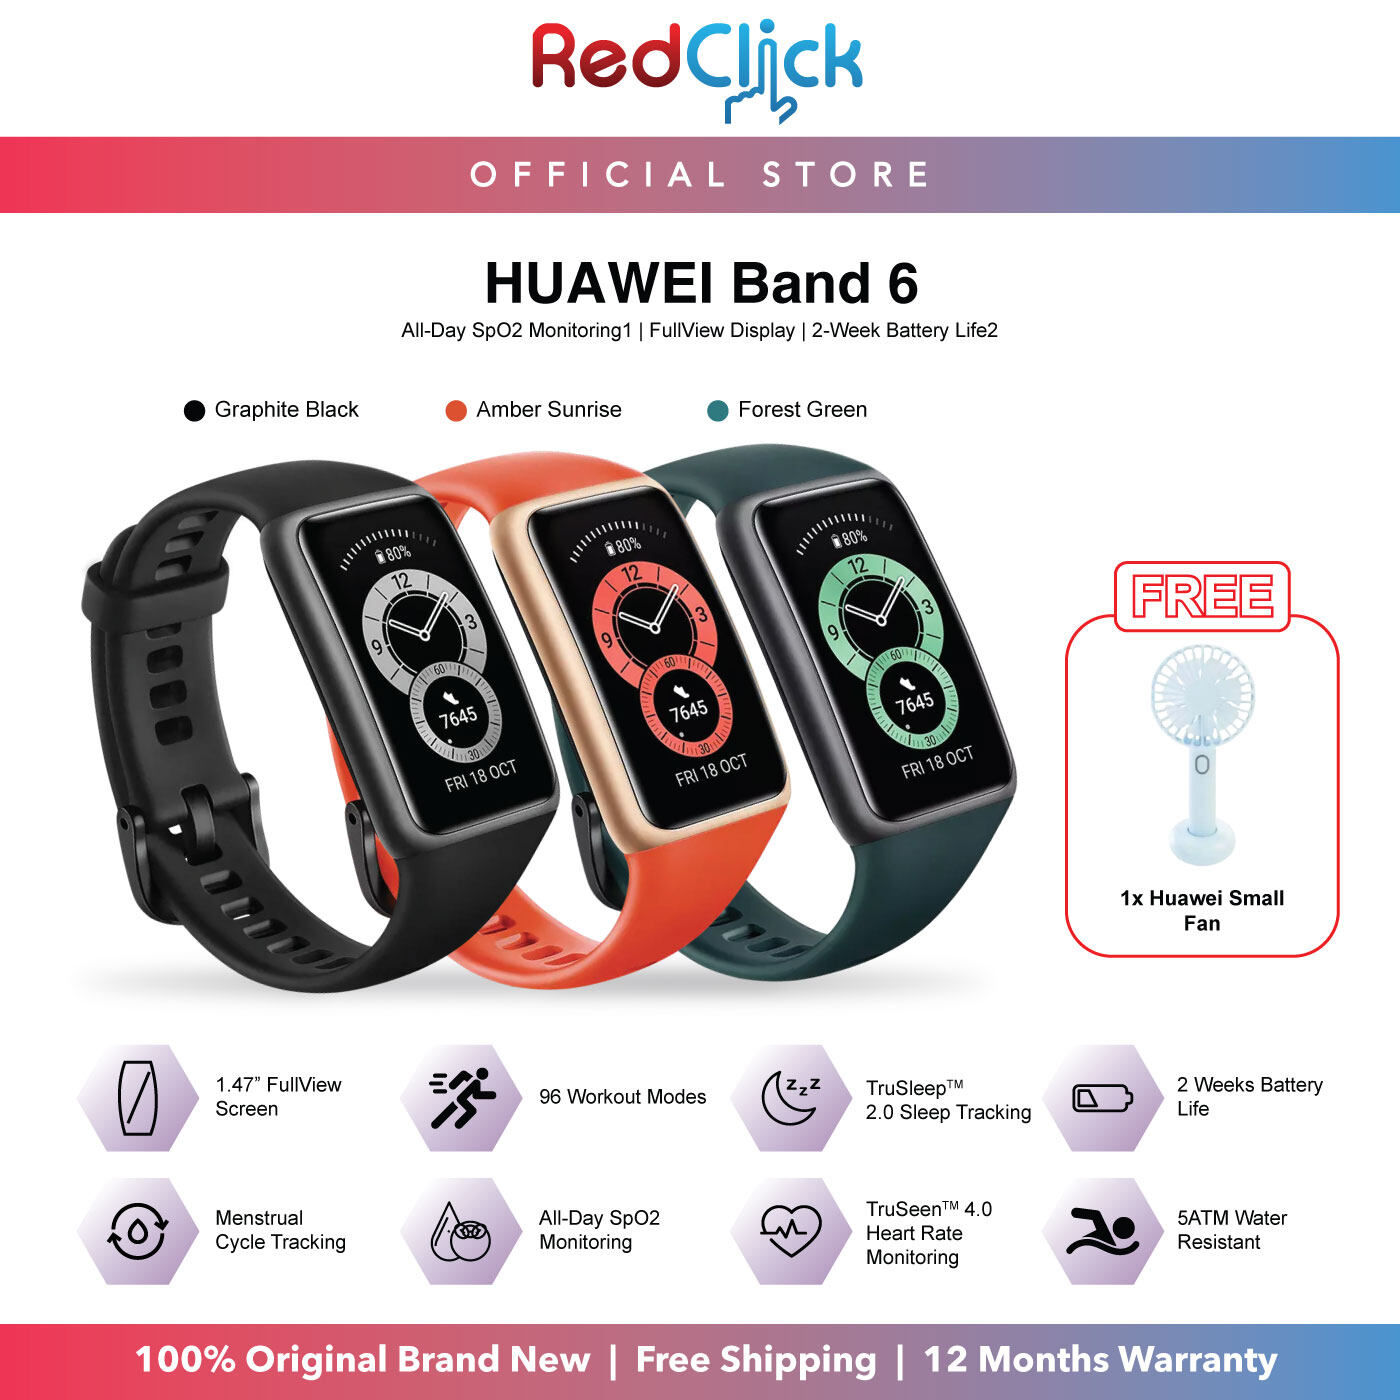 Huawei Band 6 1.47" AMOLED Full View Display All Day SpO2 Monitoring 14 Days Long Battery Life Original Huawei Product + Free Gift